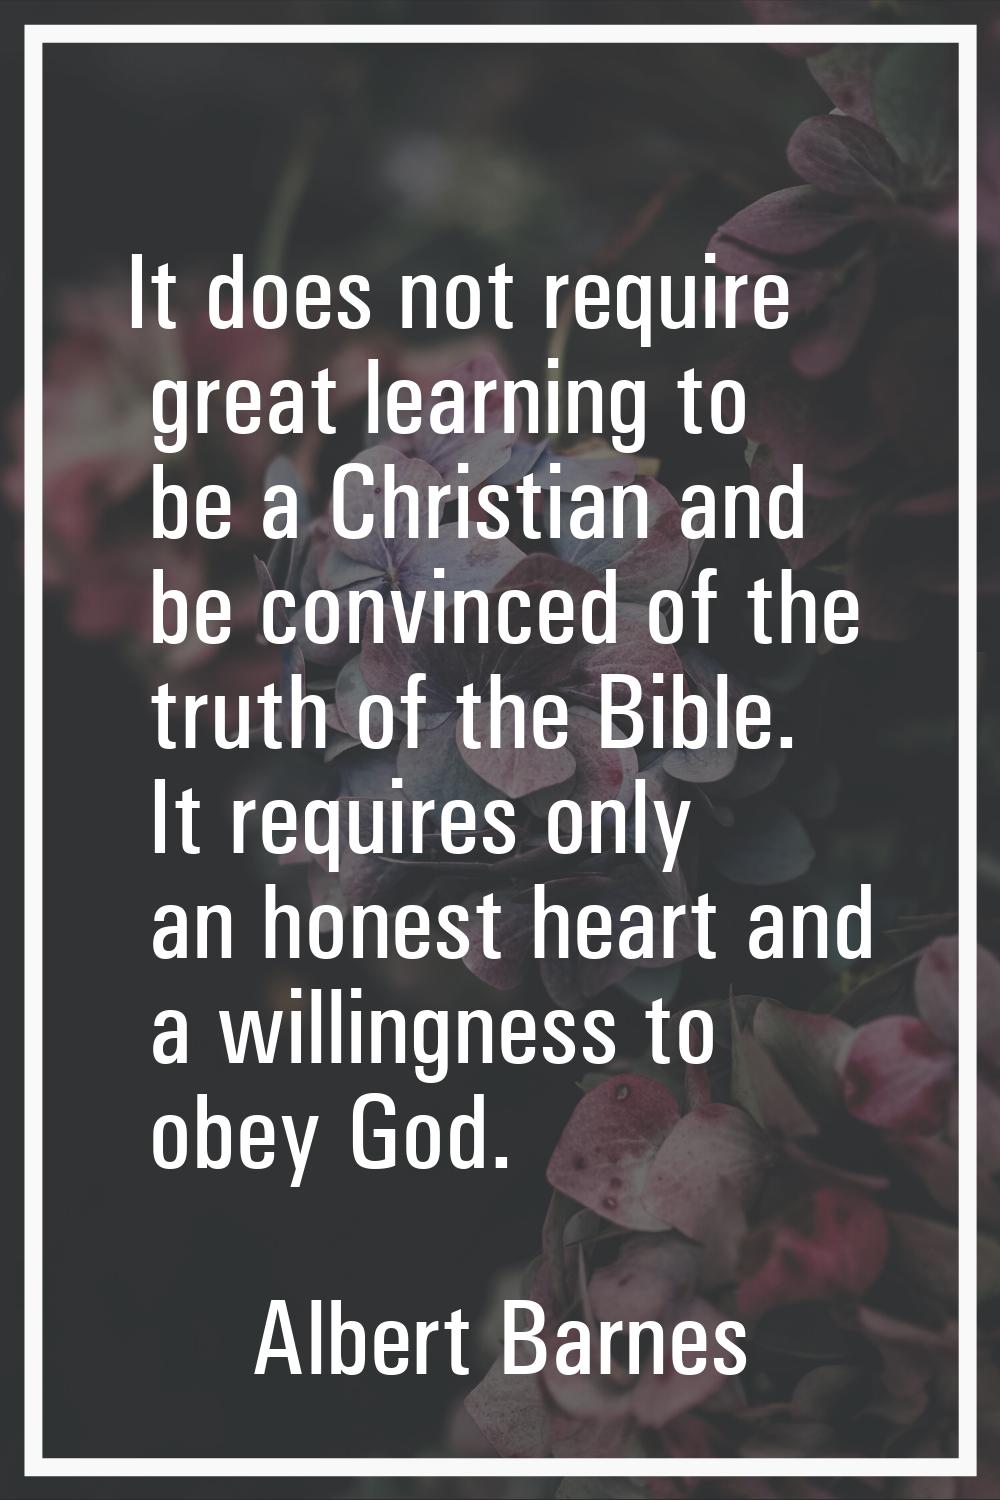 It does not require great learning to be a Christian and be convinced of the truth of the Bible. It